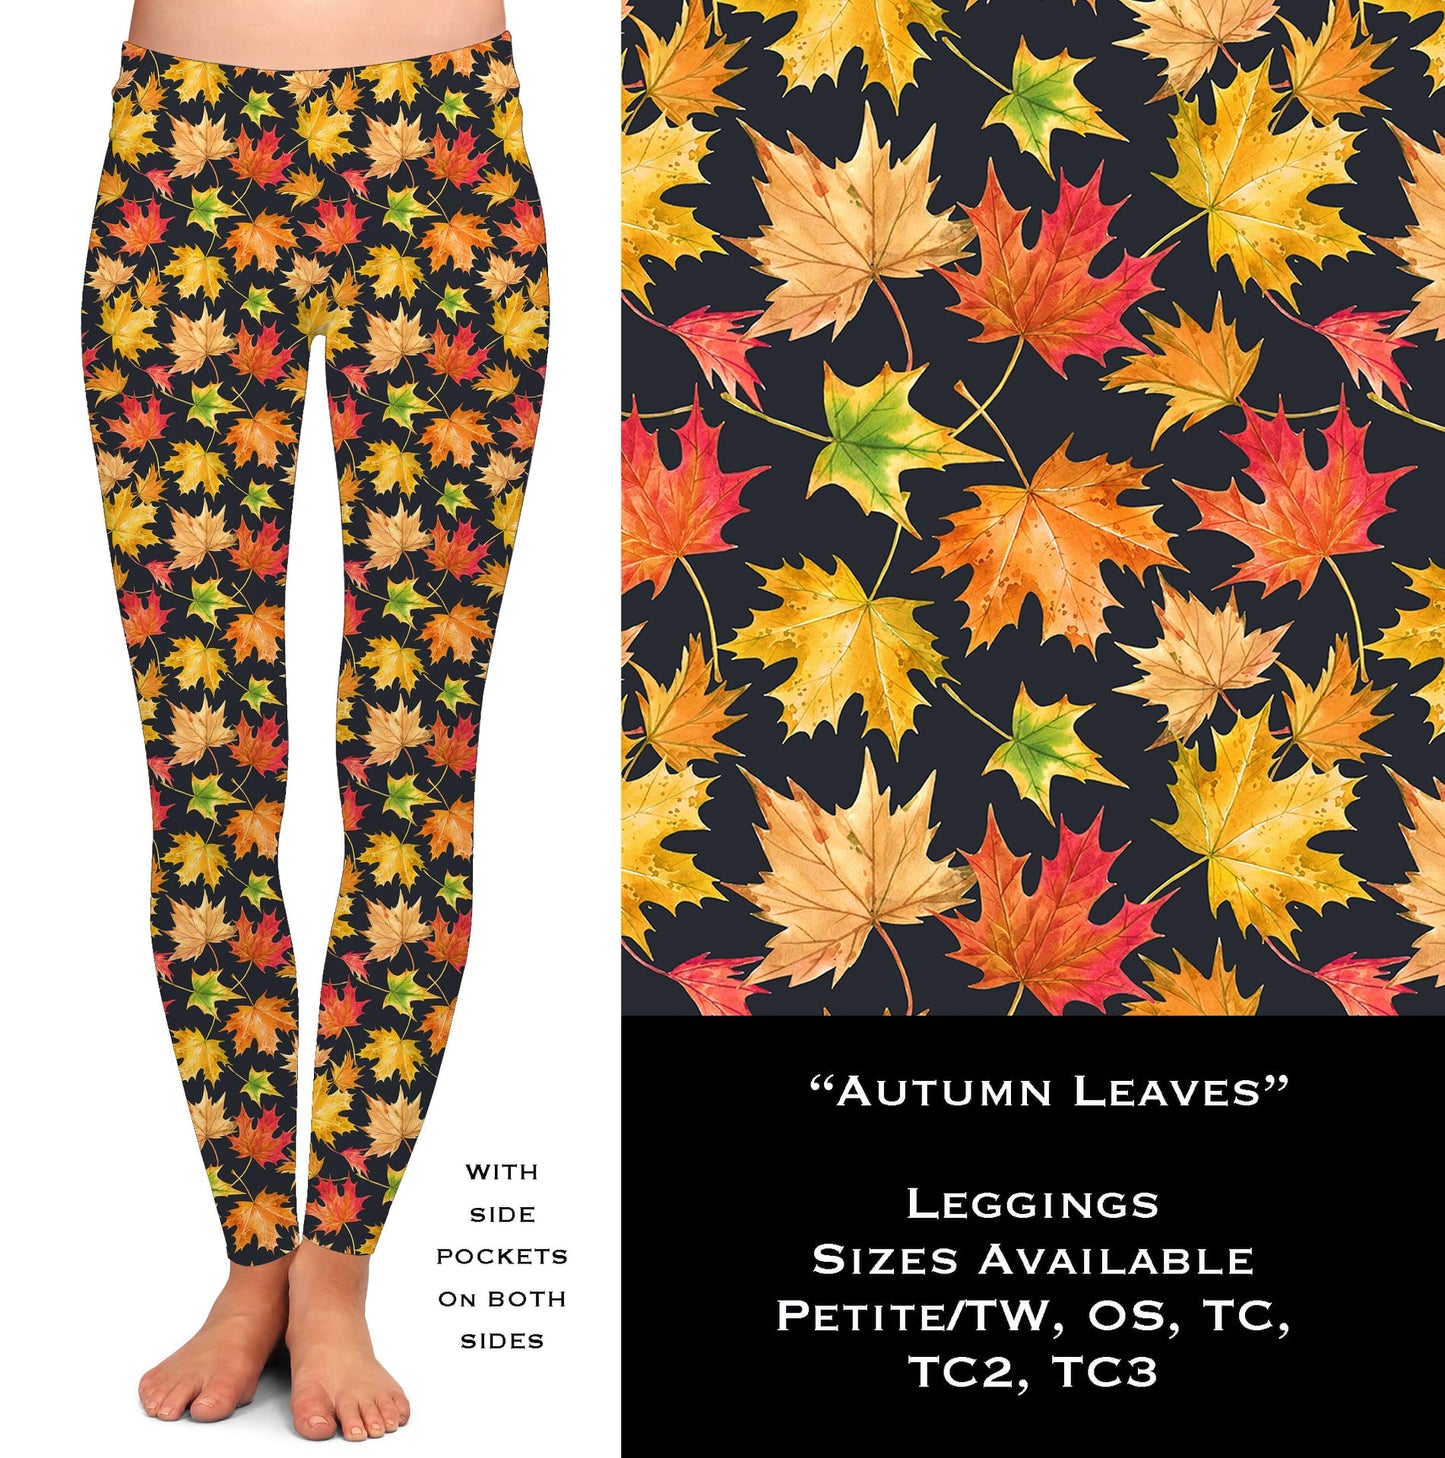 Autumn Leaves - Leggings with Pockets